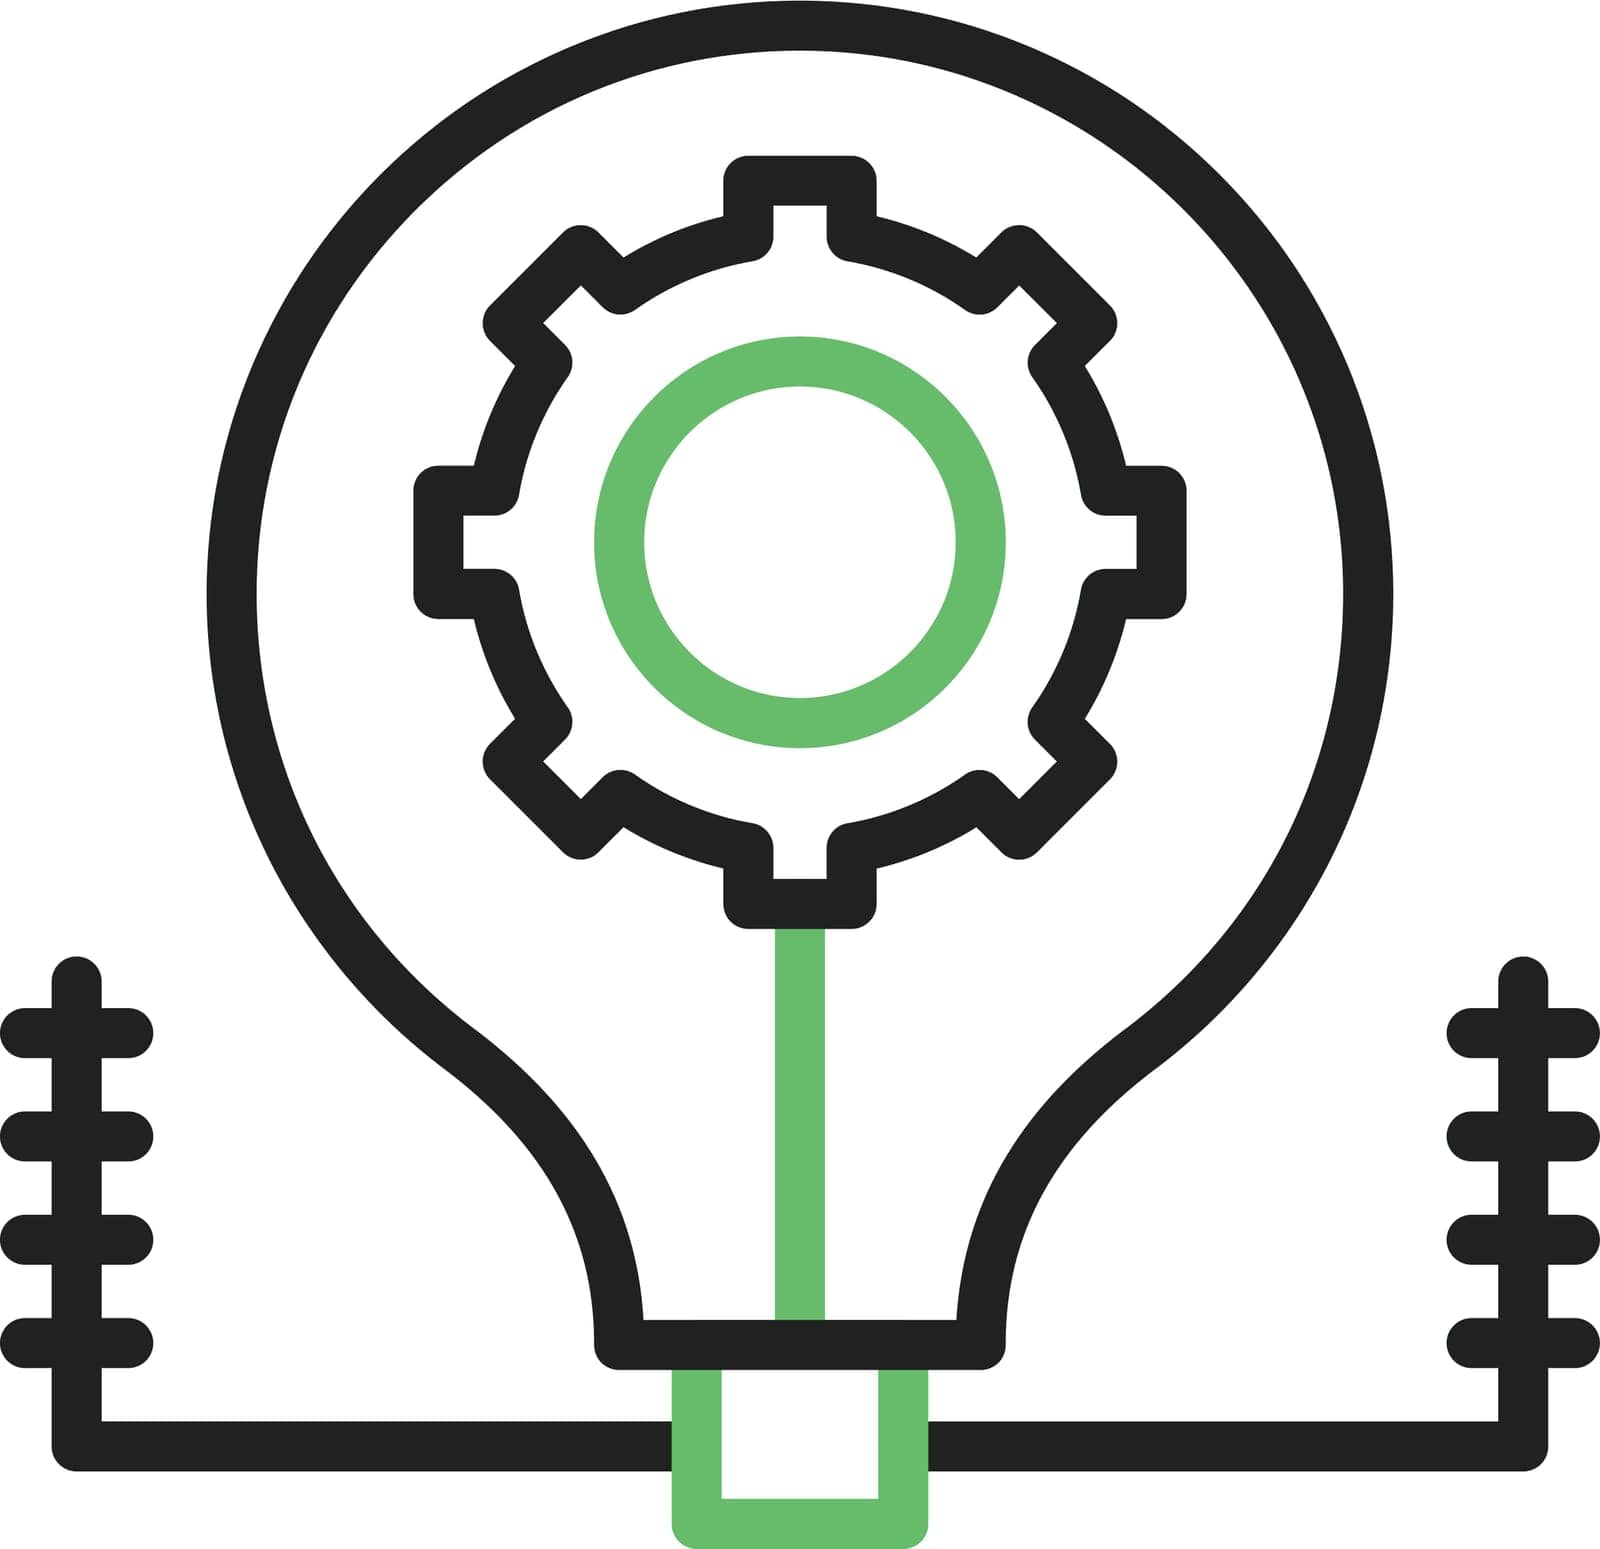 Idea Generation Icon image. Suitable for mobile application.